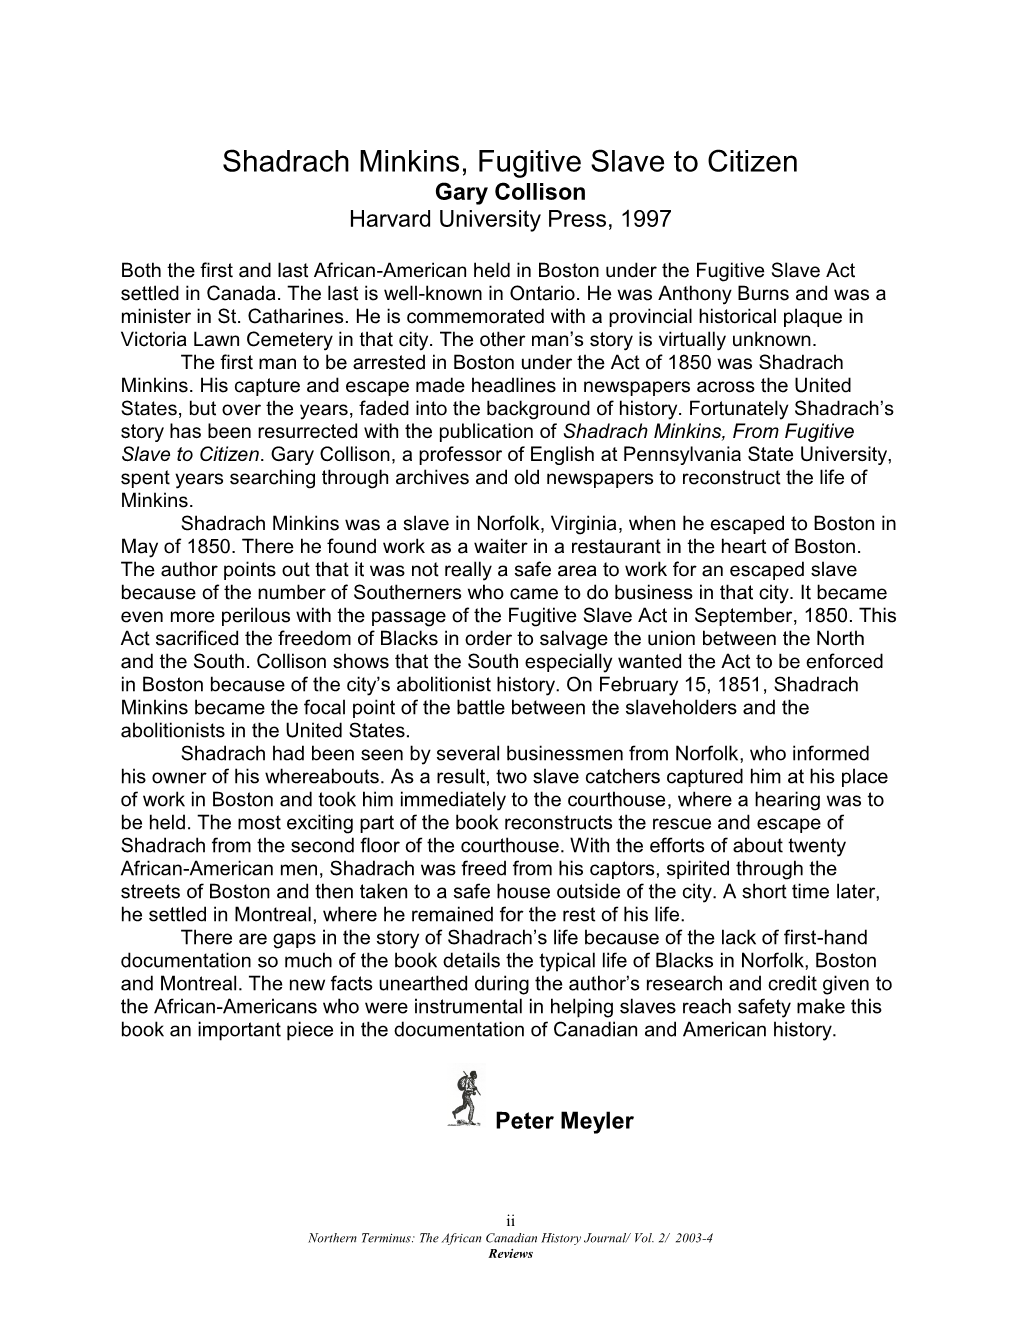 Book Review: Shadrach Minkins, Fugitive Slave to Citizen